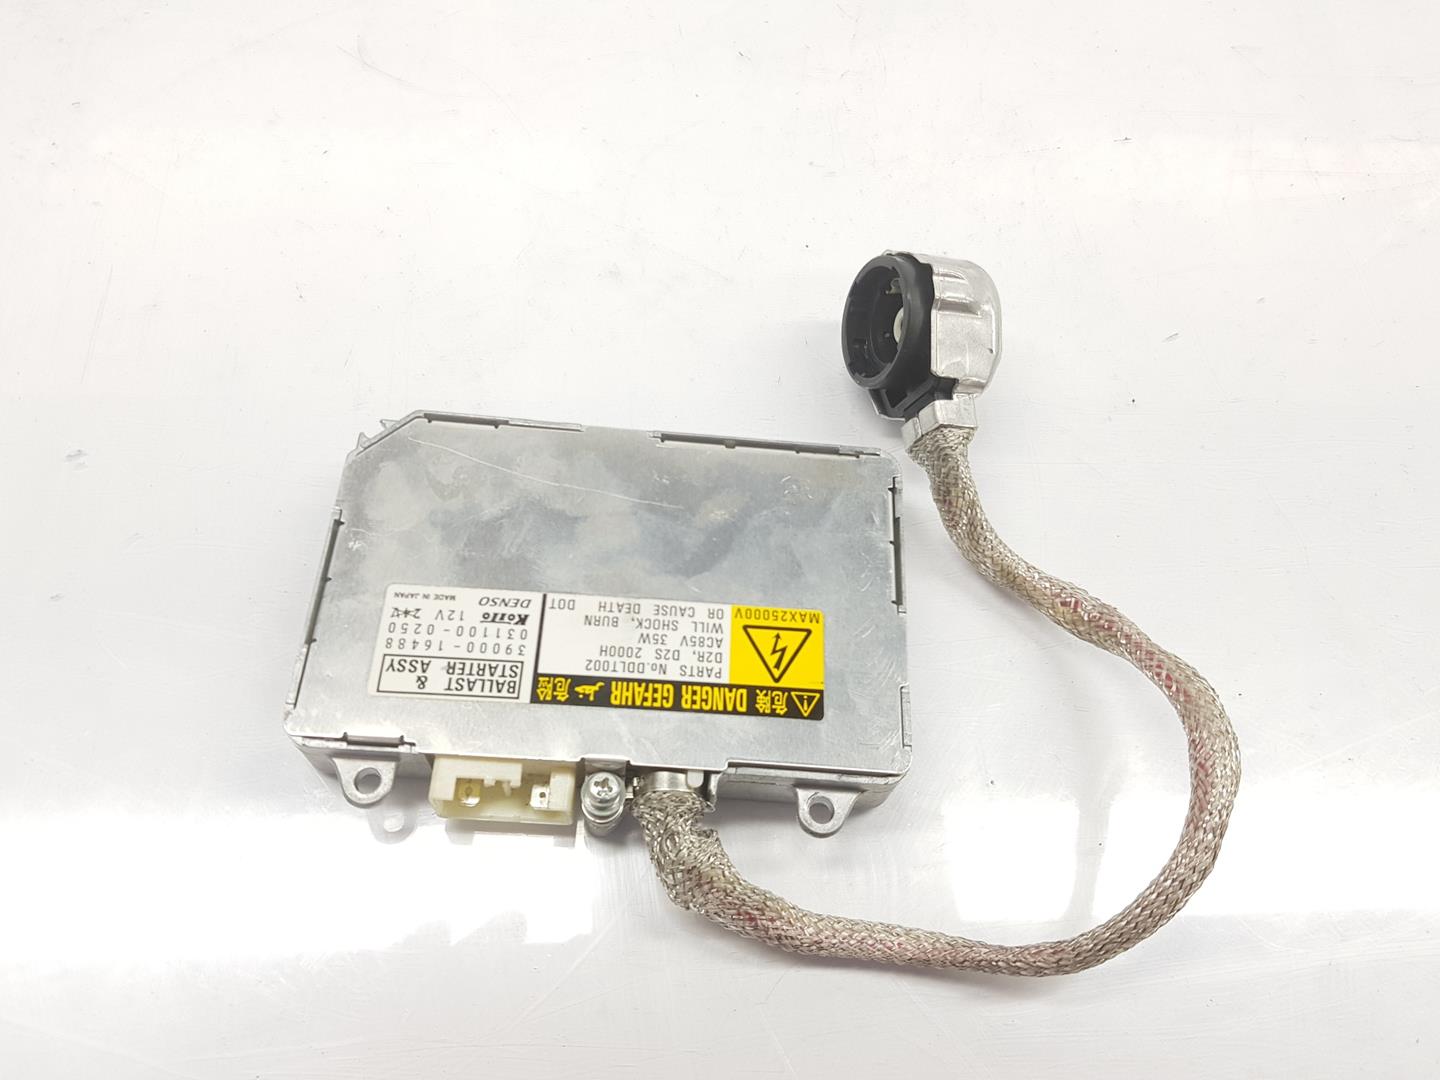 LAND ROVER Discovery 3 generation (2004-2009) Xenon Light Control Unit 3900016488, 3900016488 24145619